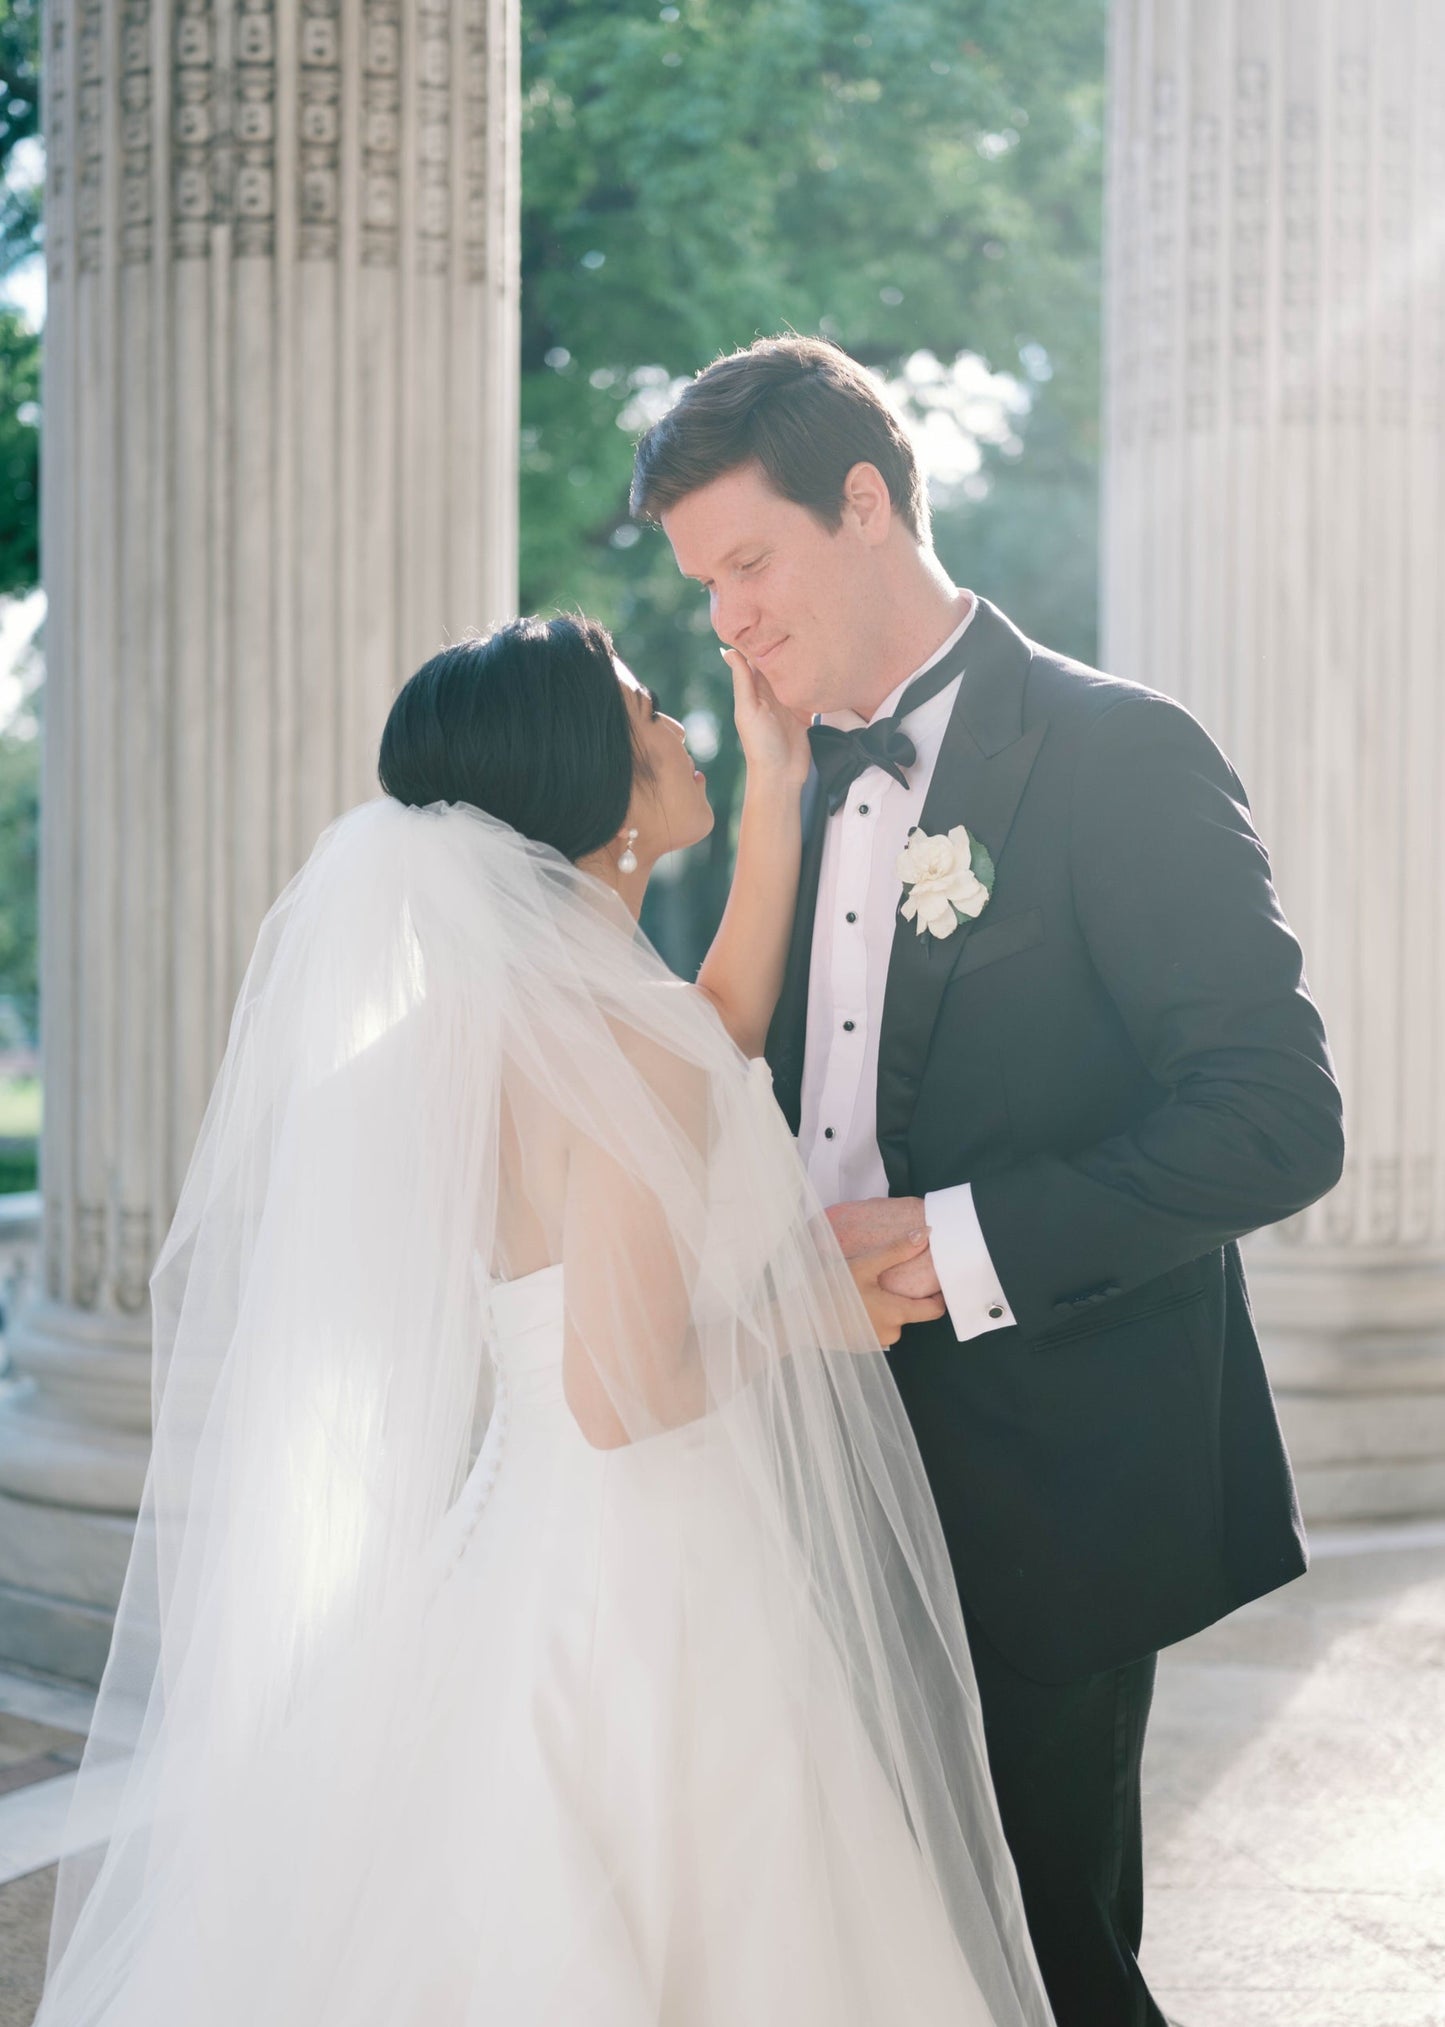 large puffy royal length puffy bridal veil over low chignon in bride's hair as she holds groom's face